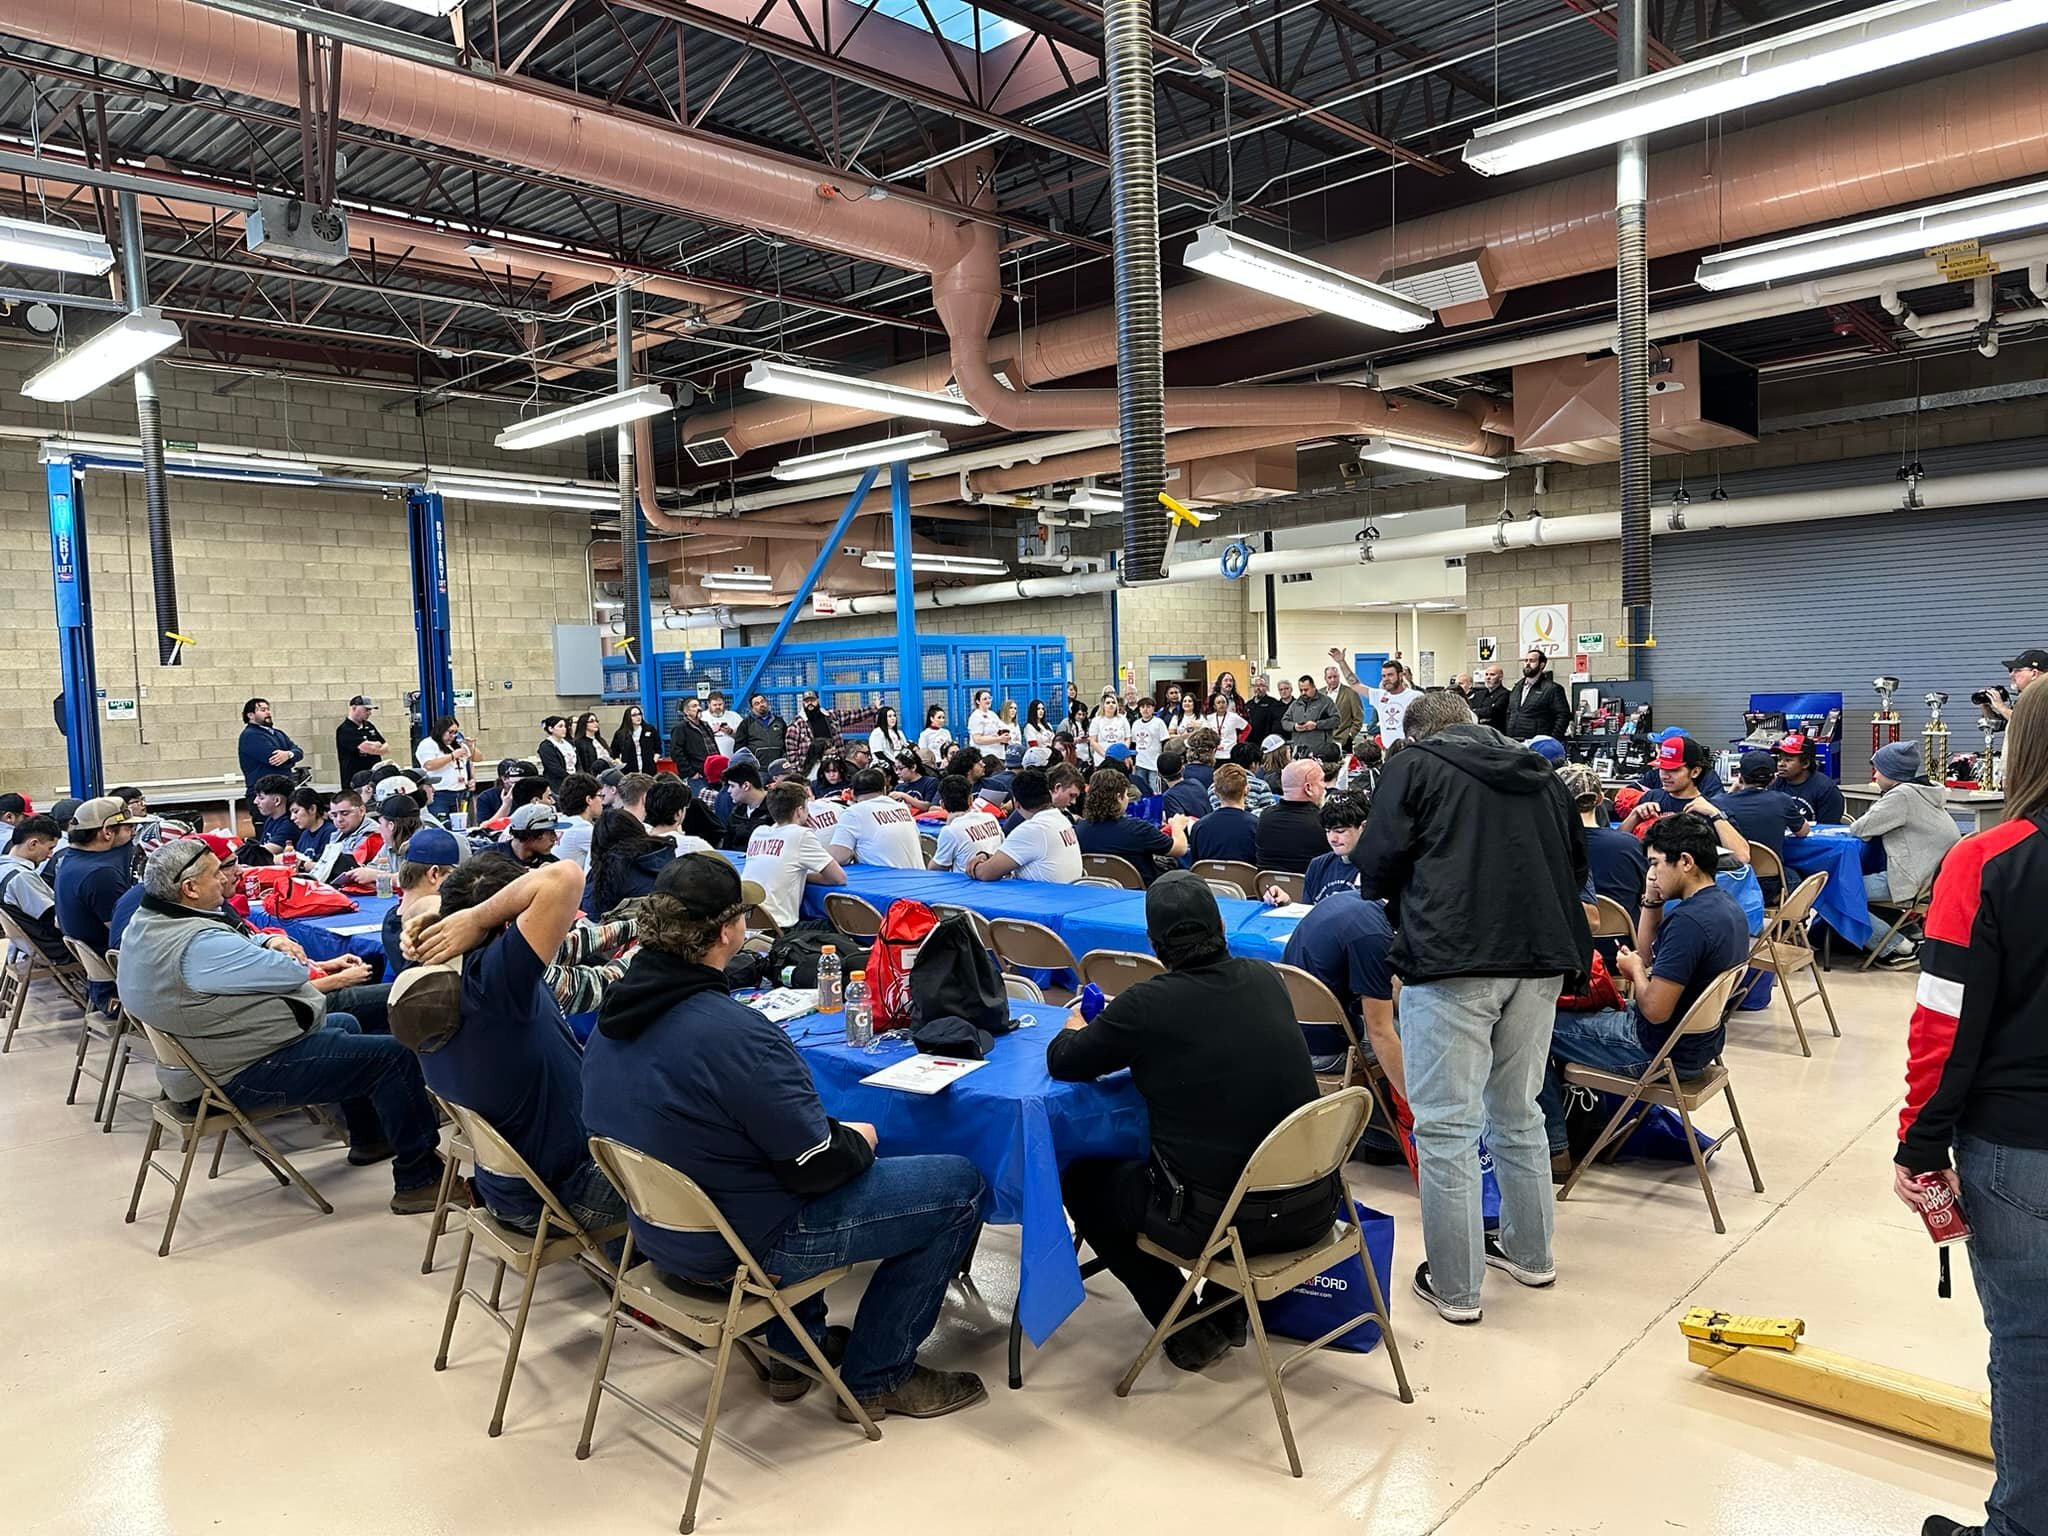 Yesterday was a banner day for @nmjc_workforce, and specifically our Automotive depertment. We held our annual high school automotive competition. We had maximum capacity of 68 students, from 15 different high schools, from 3 different states (NM, TX